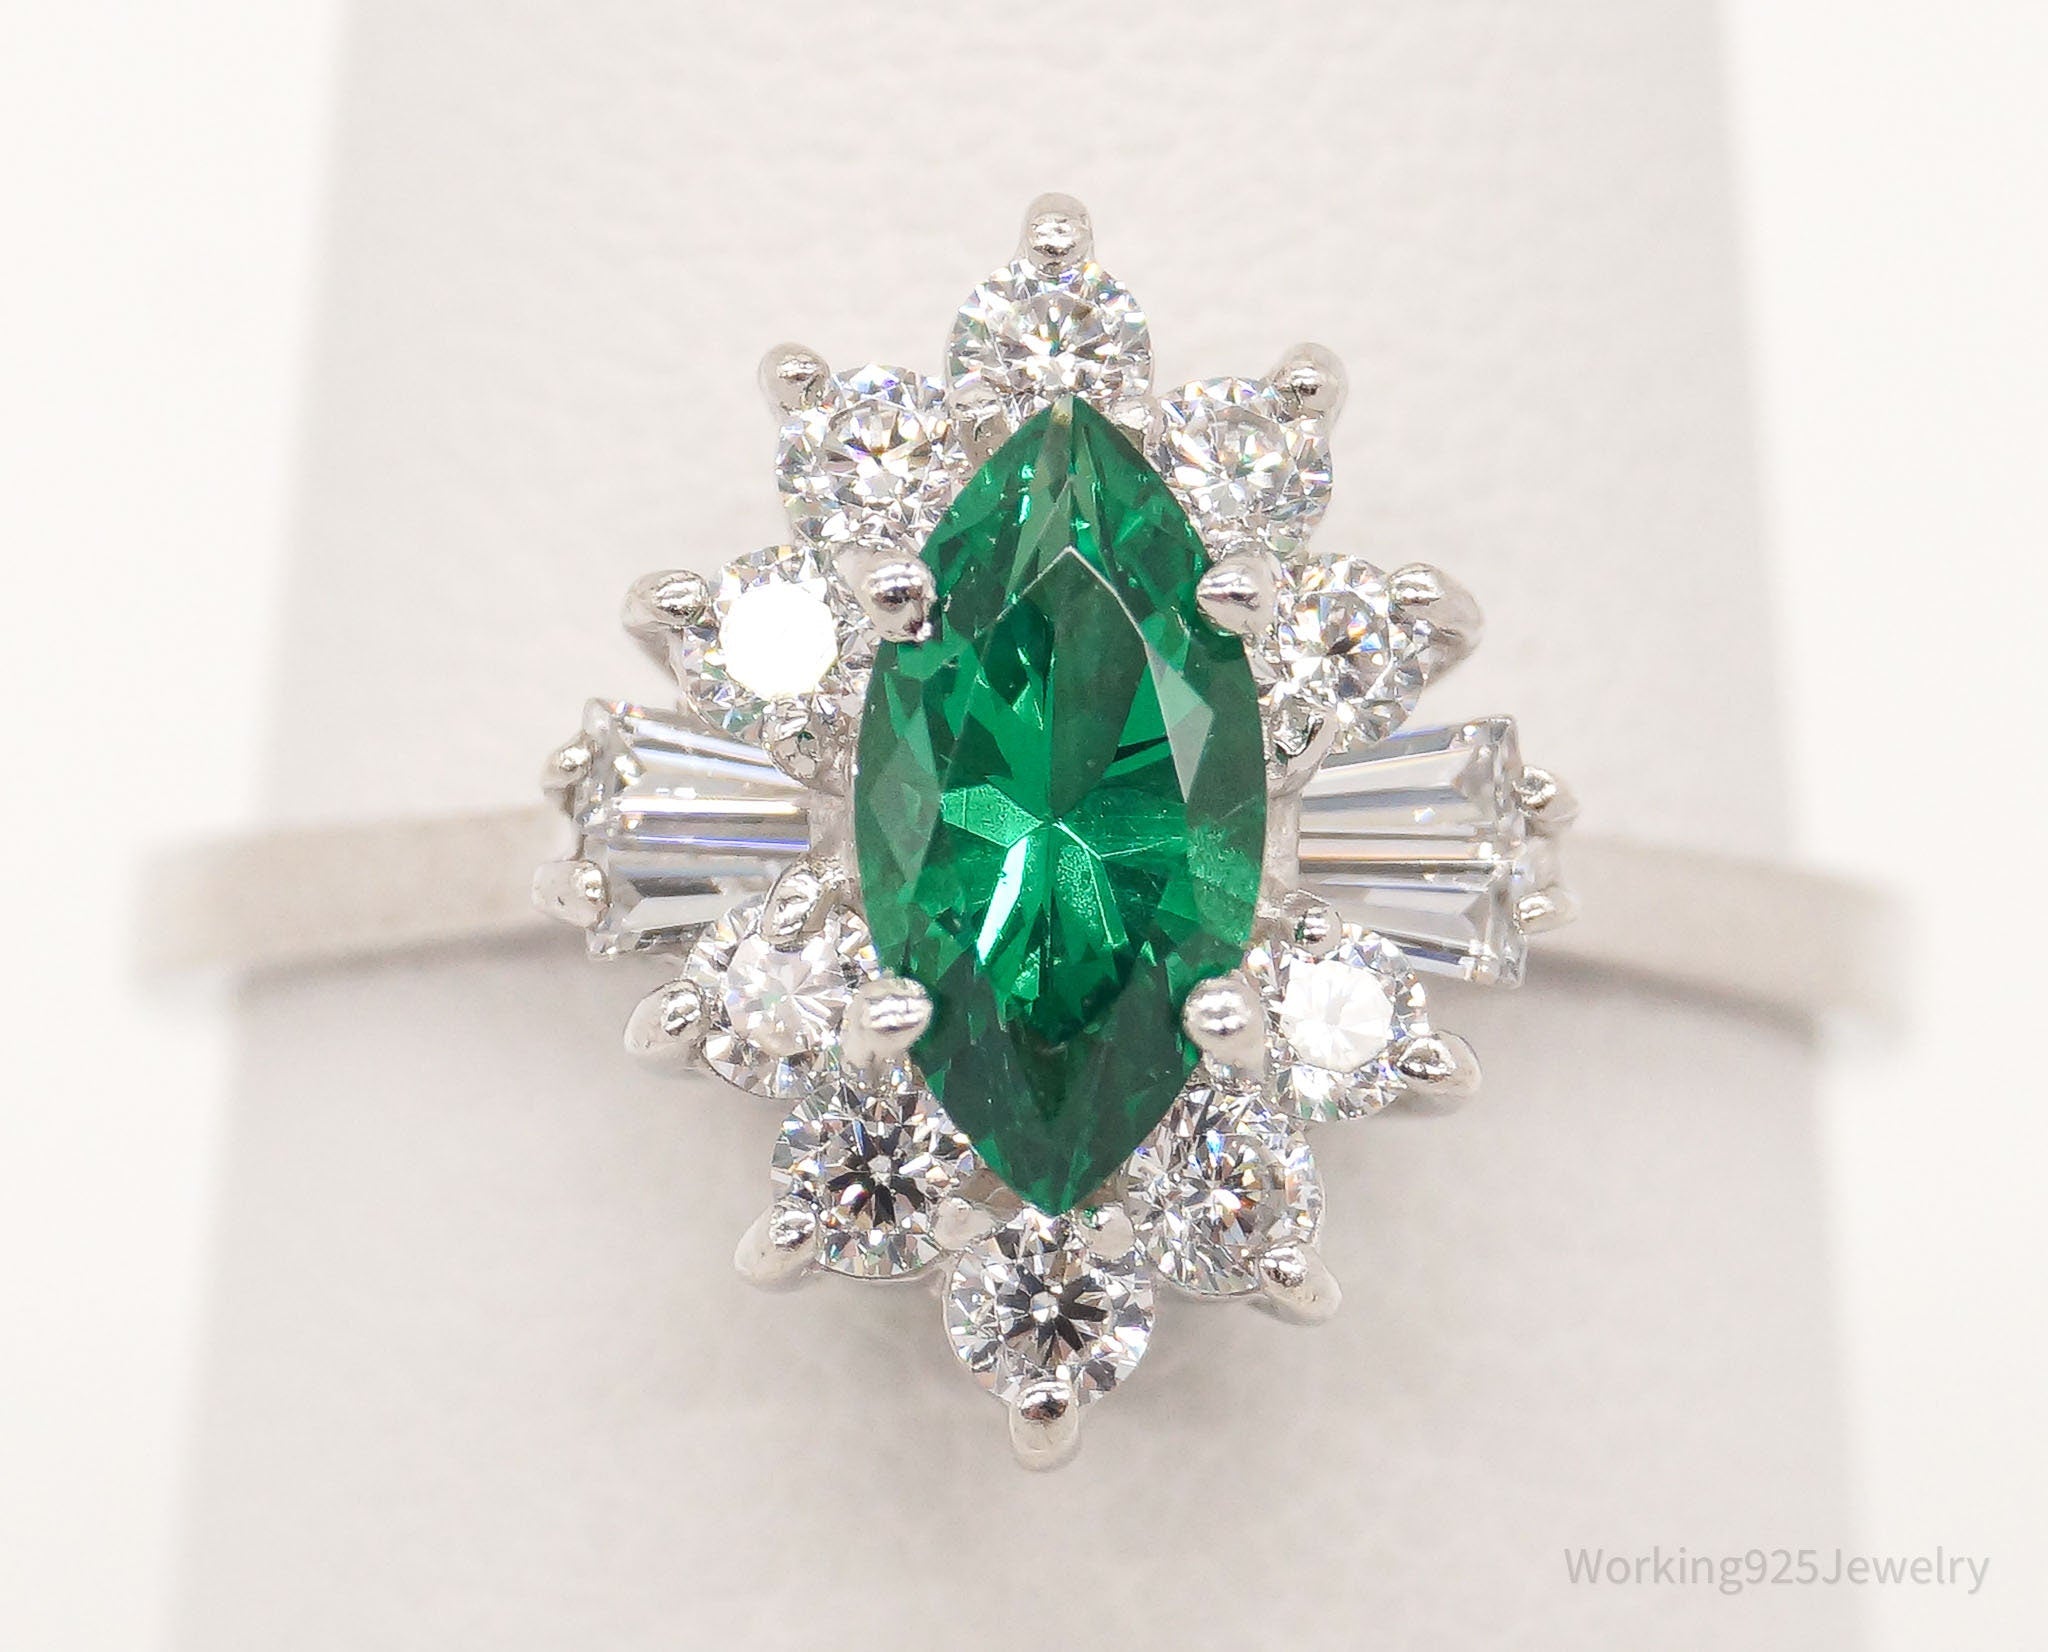 Vintage Lab Emerald Cubic Zirconia Sterling Silver Ring - Size 6.75